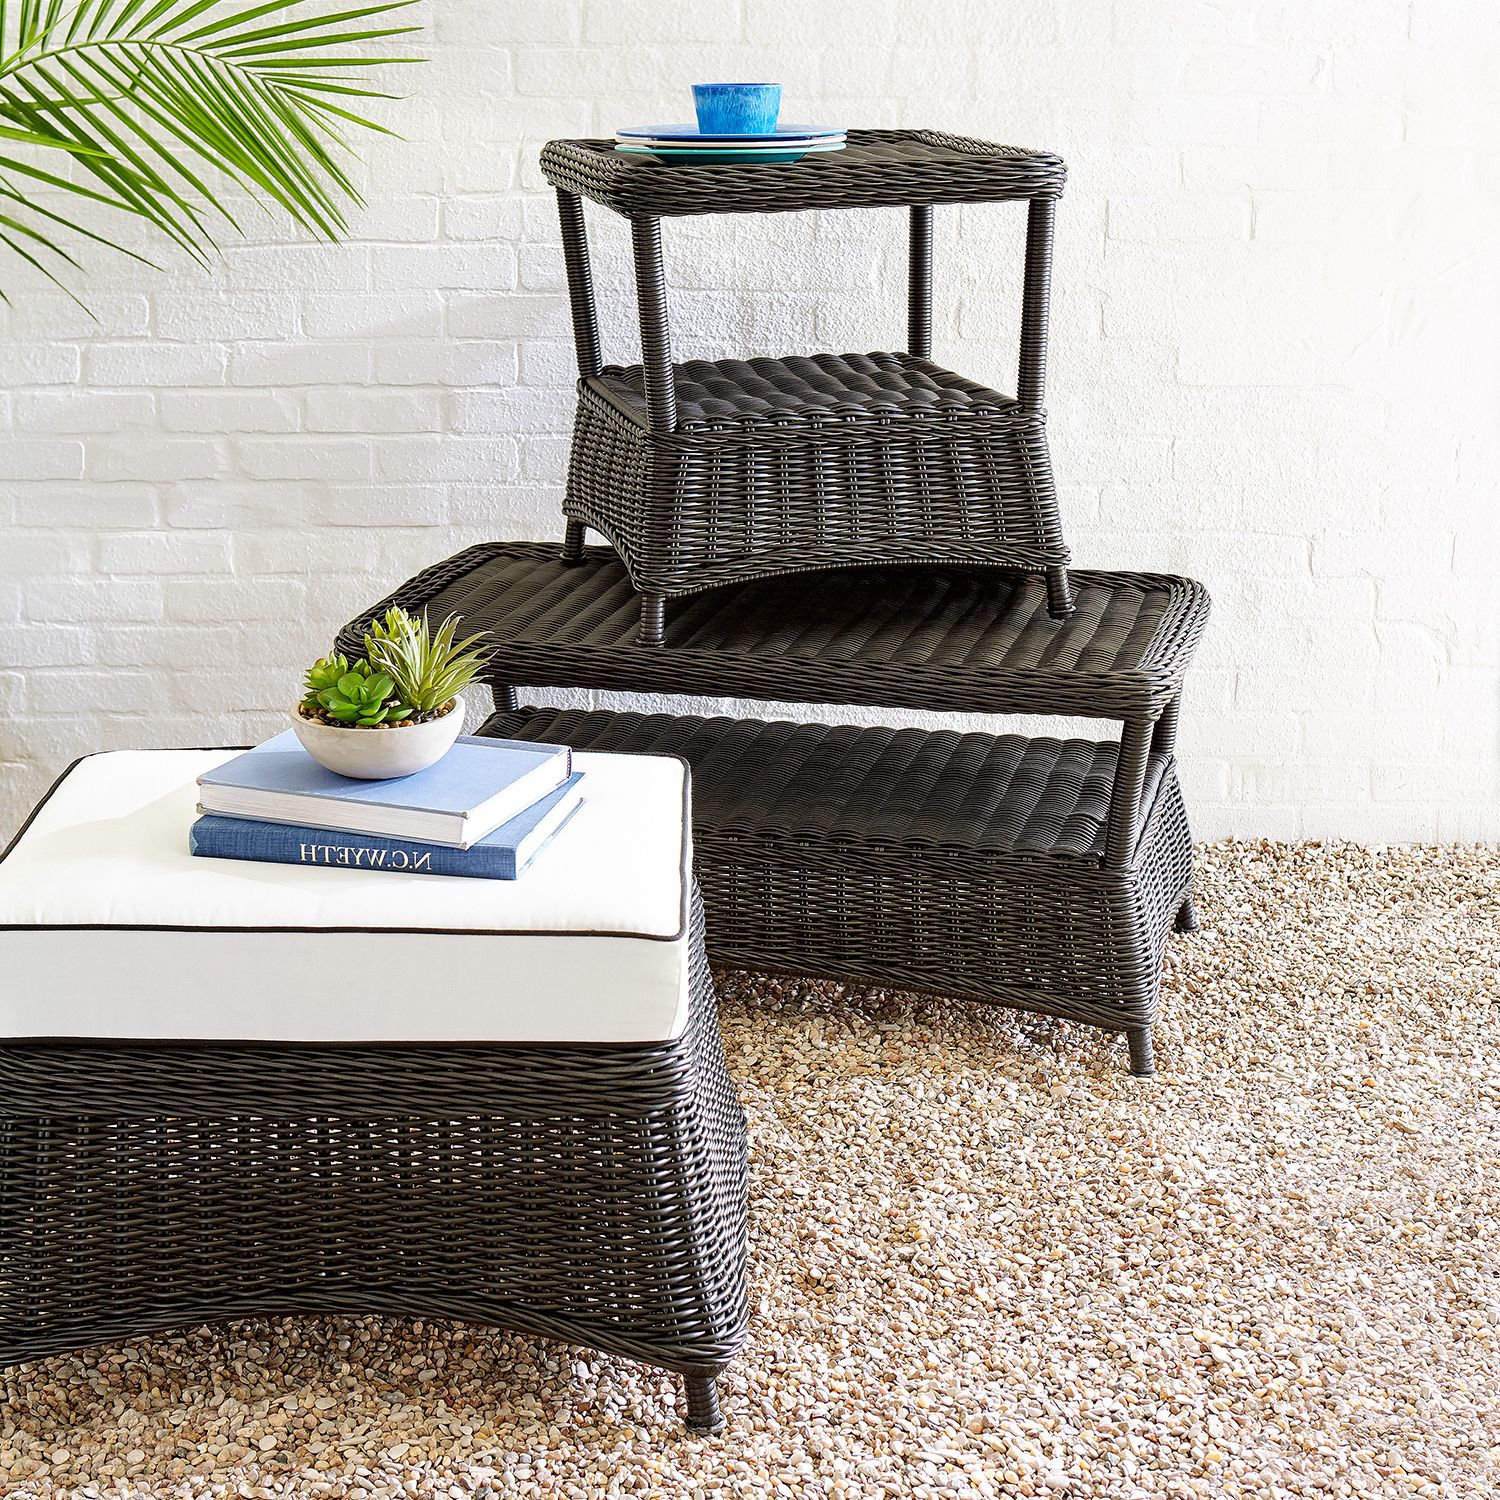 Well Known Wicker Coffee Tables Throughout Black Wicker Coffee Table – Pier1 (Gallery 4 of 20)